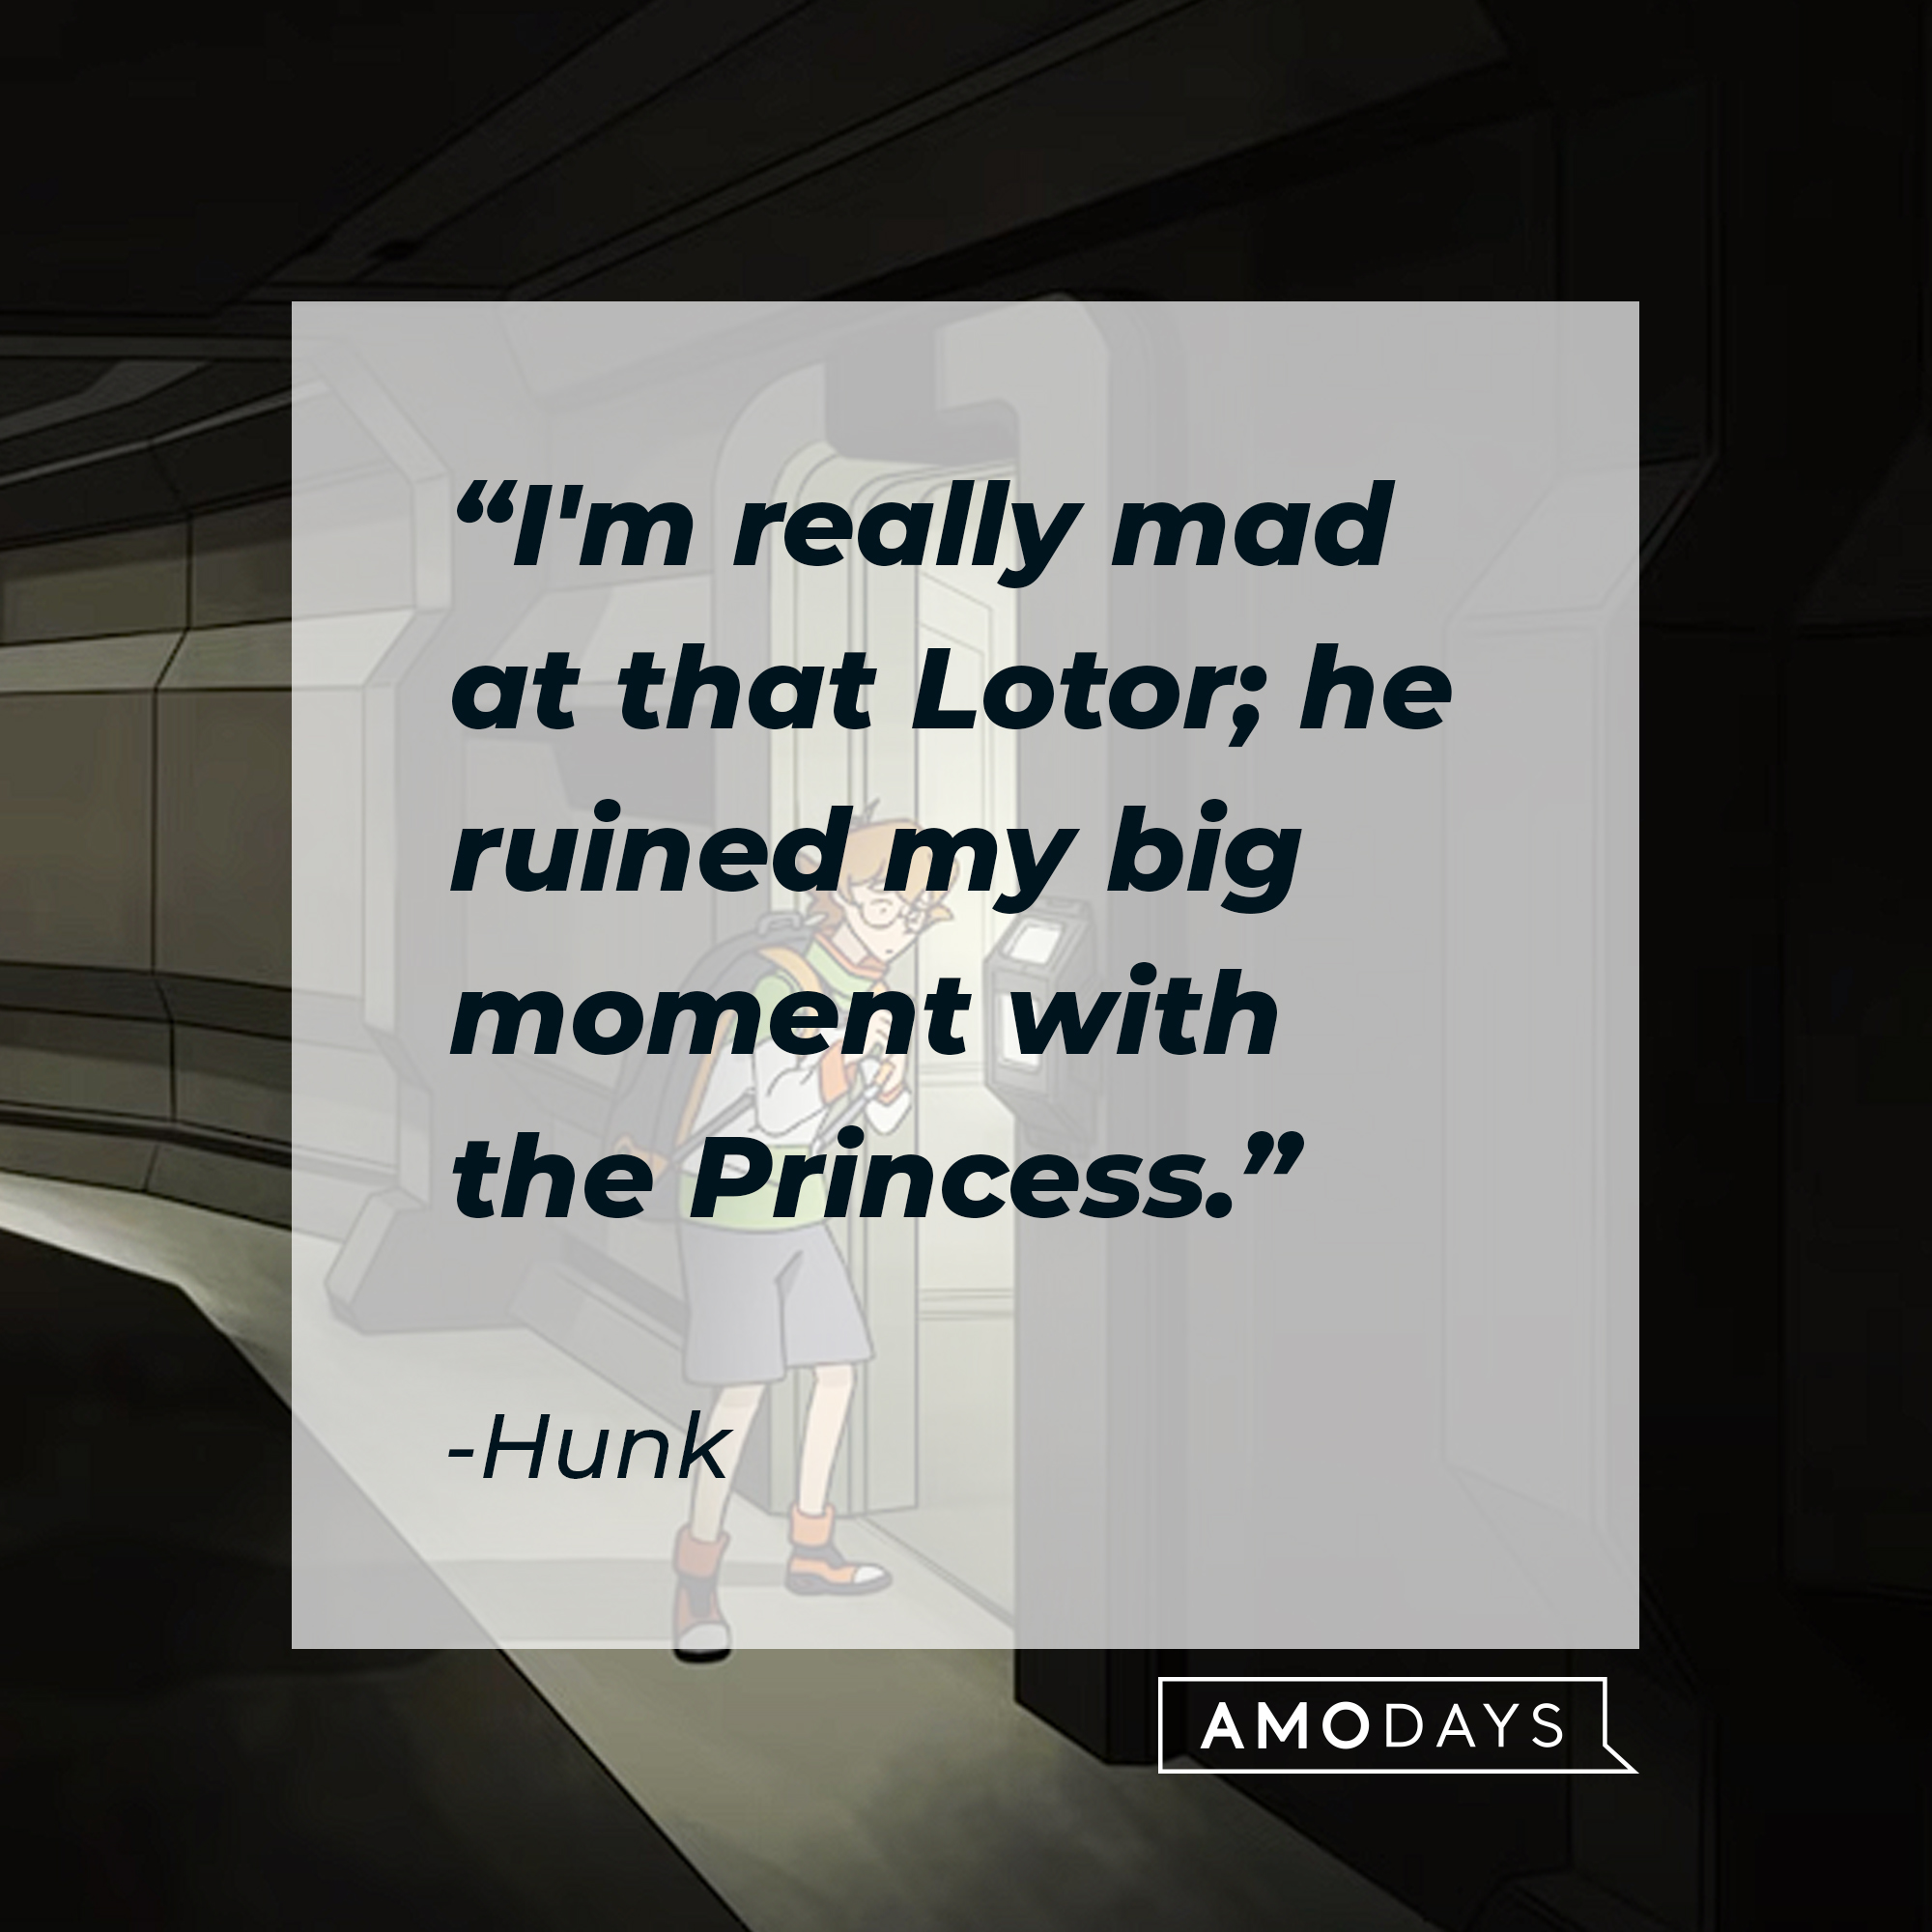 Hunk's quote: "I'm really mad at that Lotor; he ruined my big moment with the Princess." | Source: youtube.com/netflixafterschool